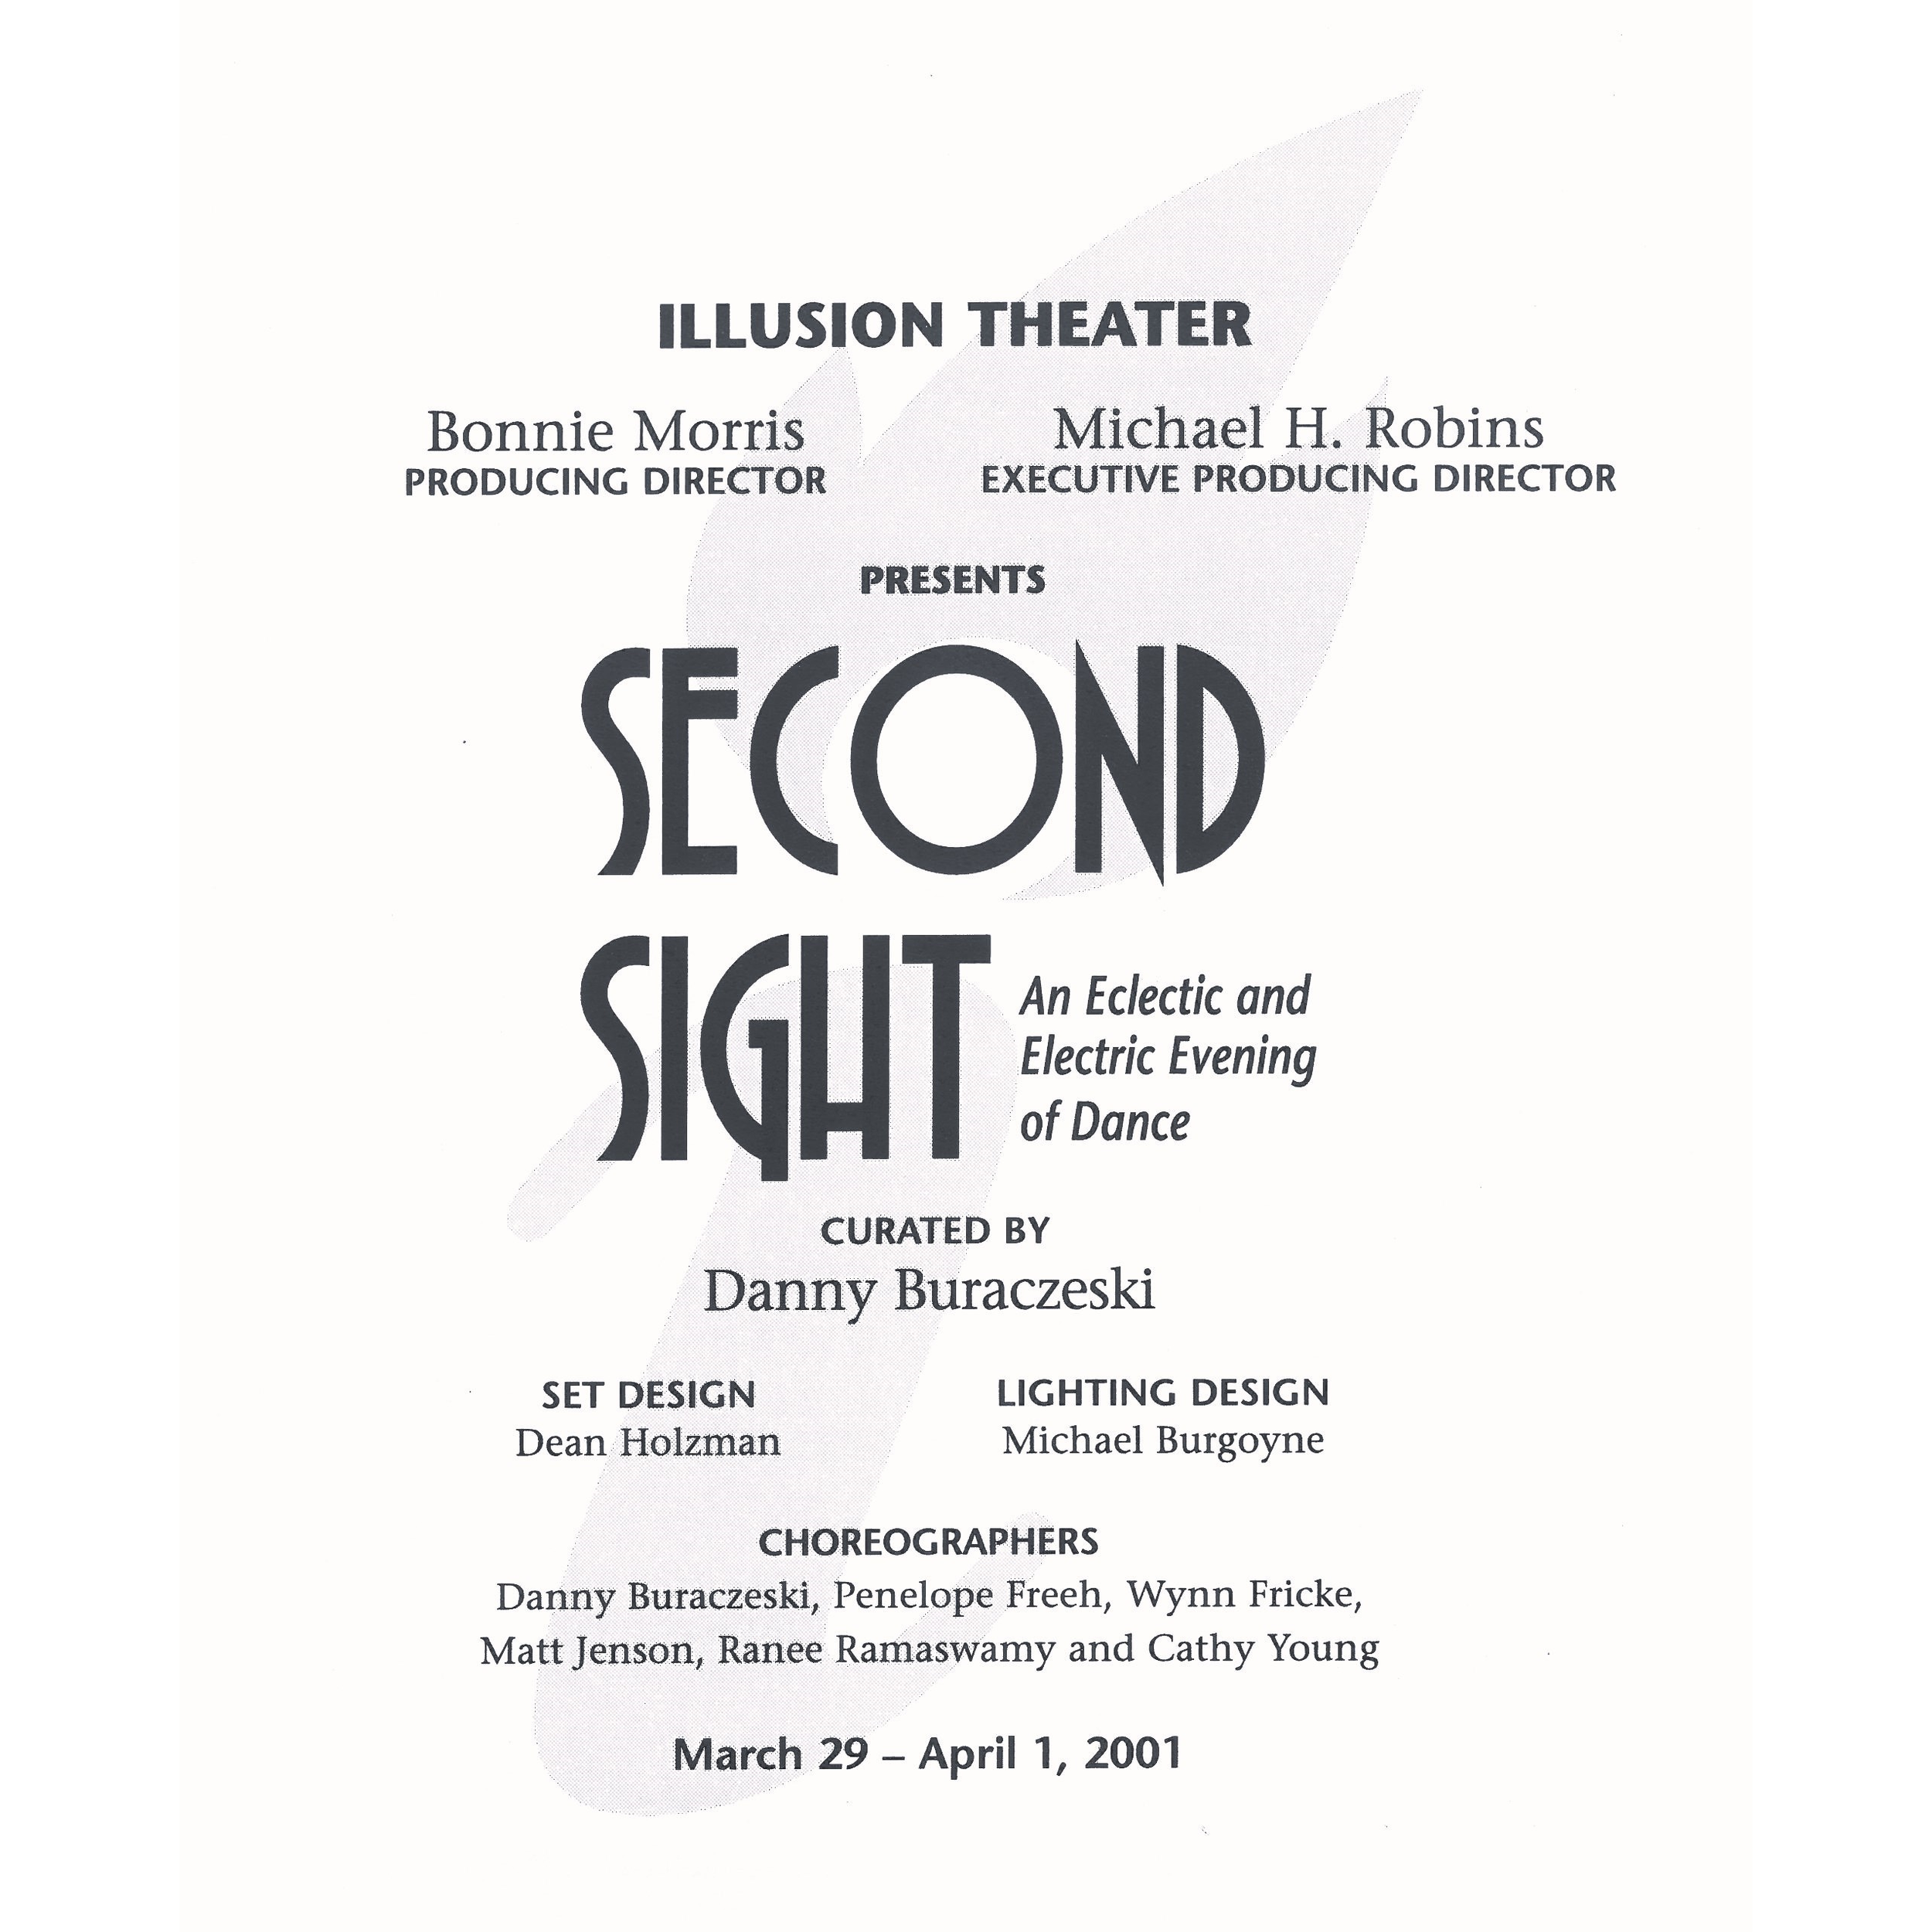 2001 - Second Sight, An Eclectic and Electric Evening of Dance